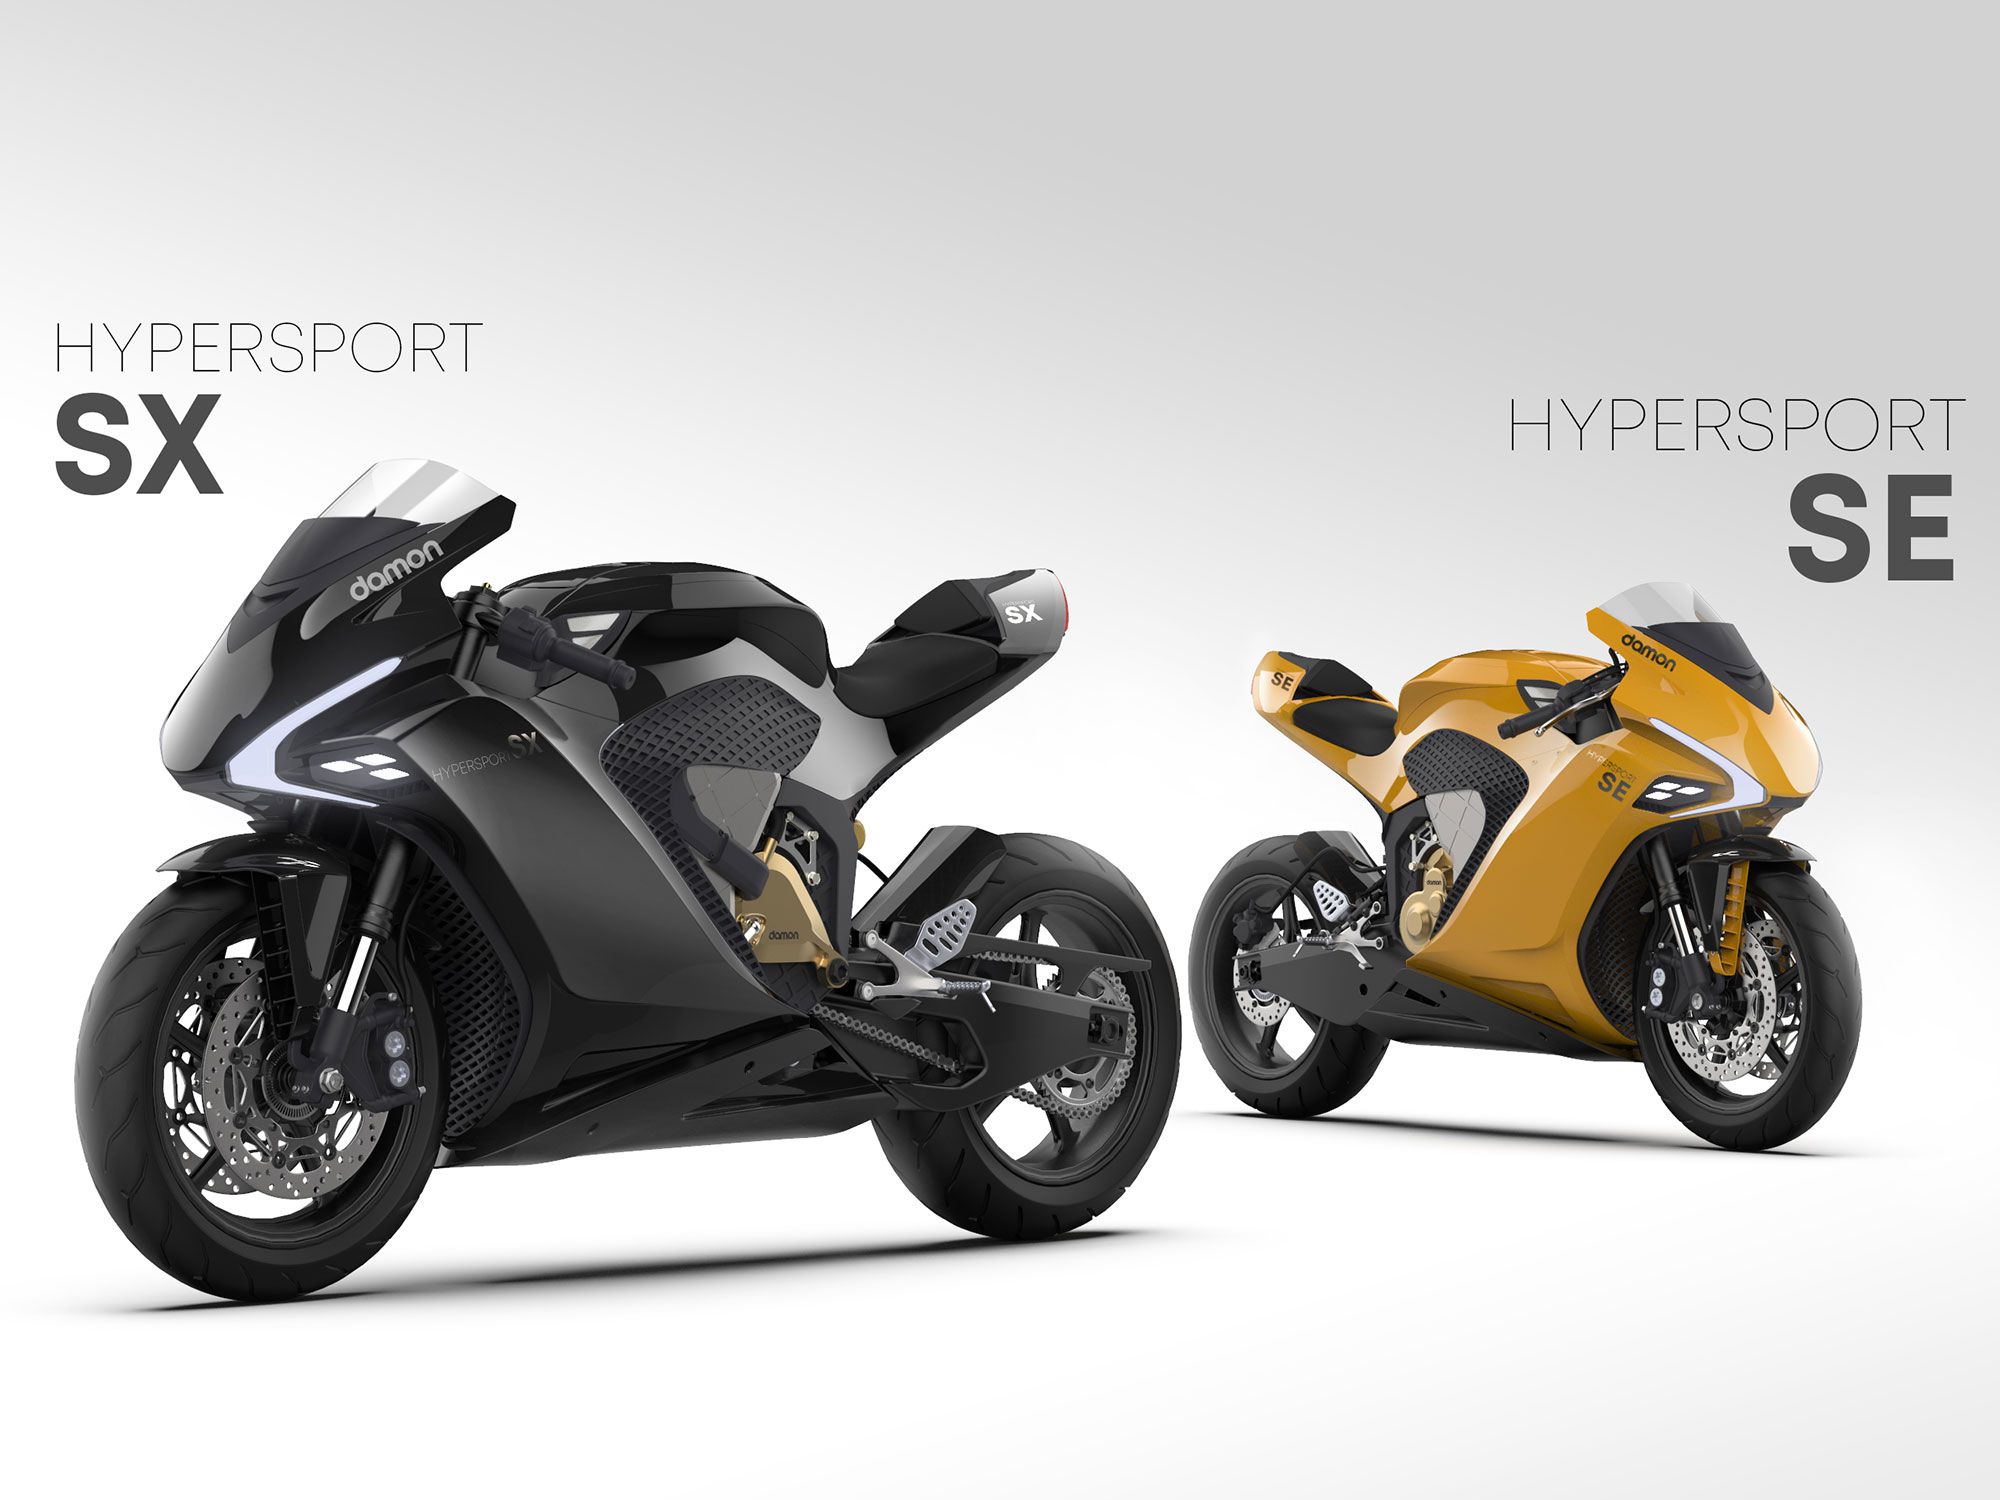 Damon Motorcycles brings some innovative tech to the game with his Hypersport SX and SE models.